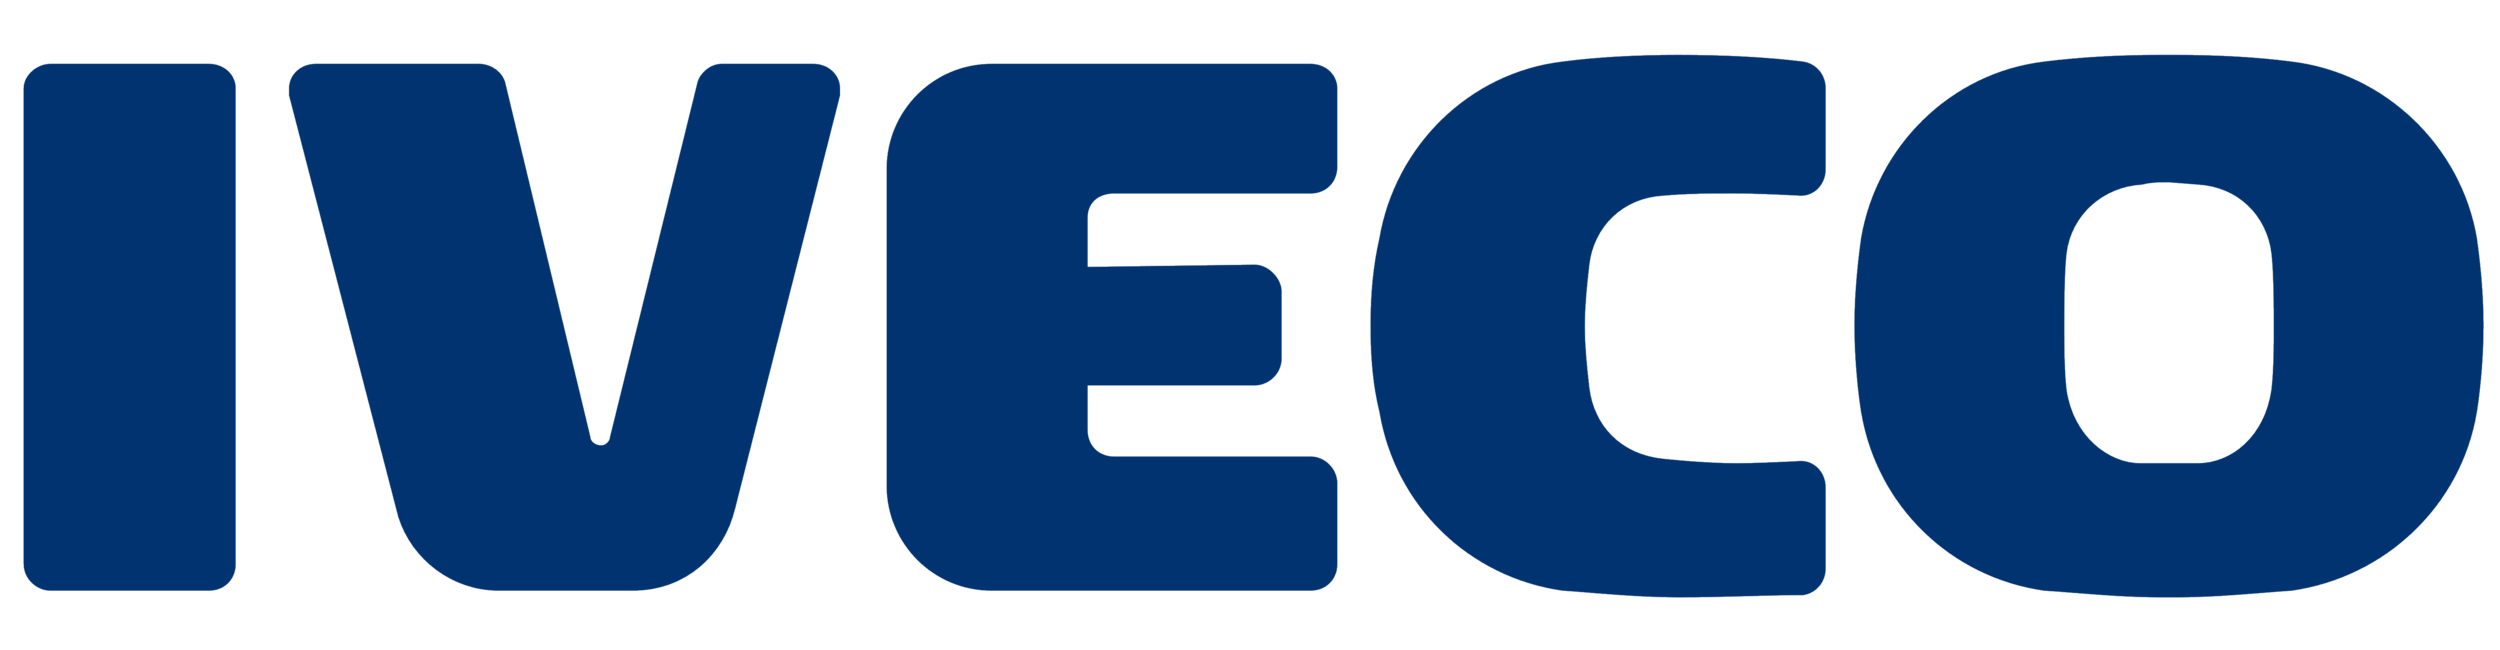 Iveco_logo.png